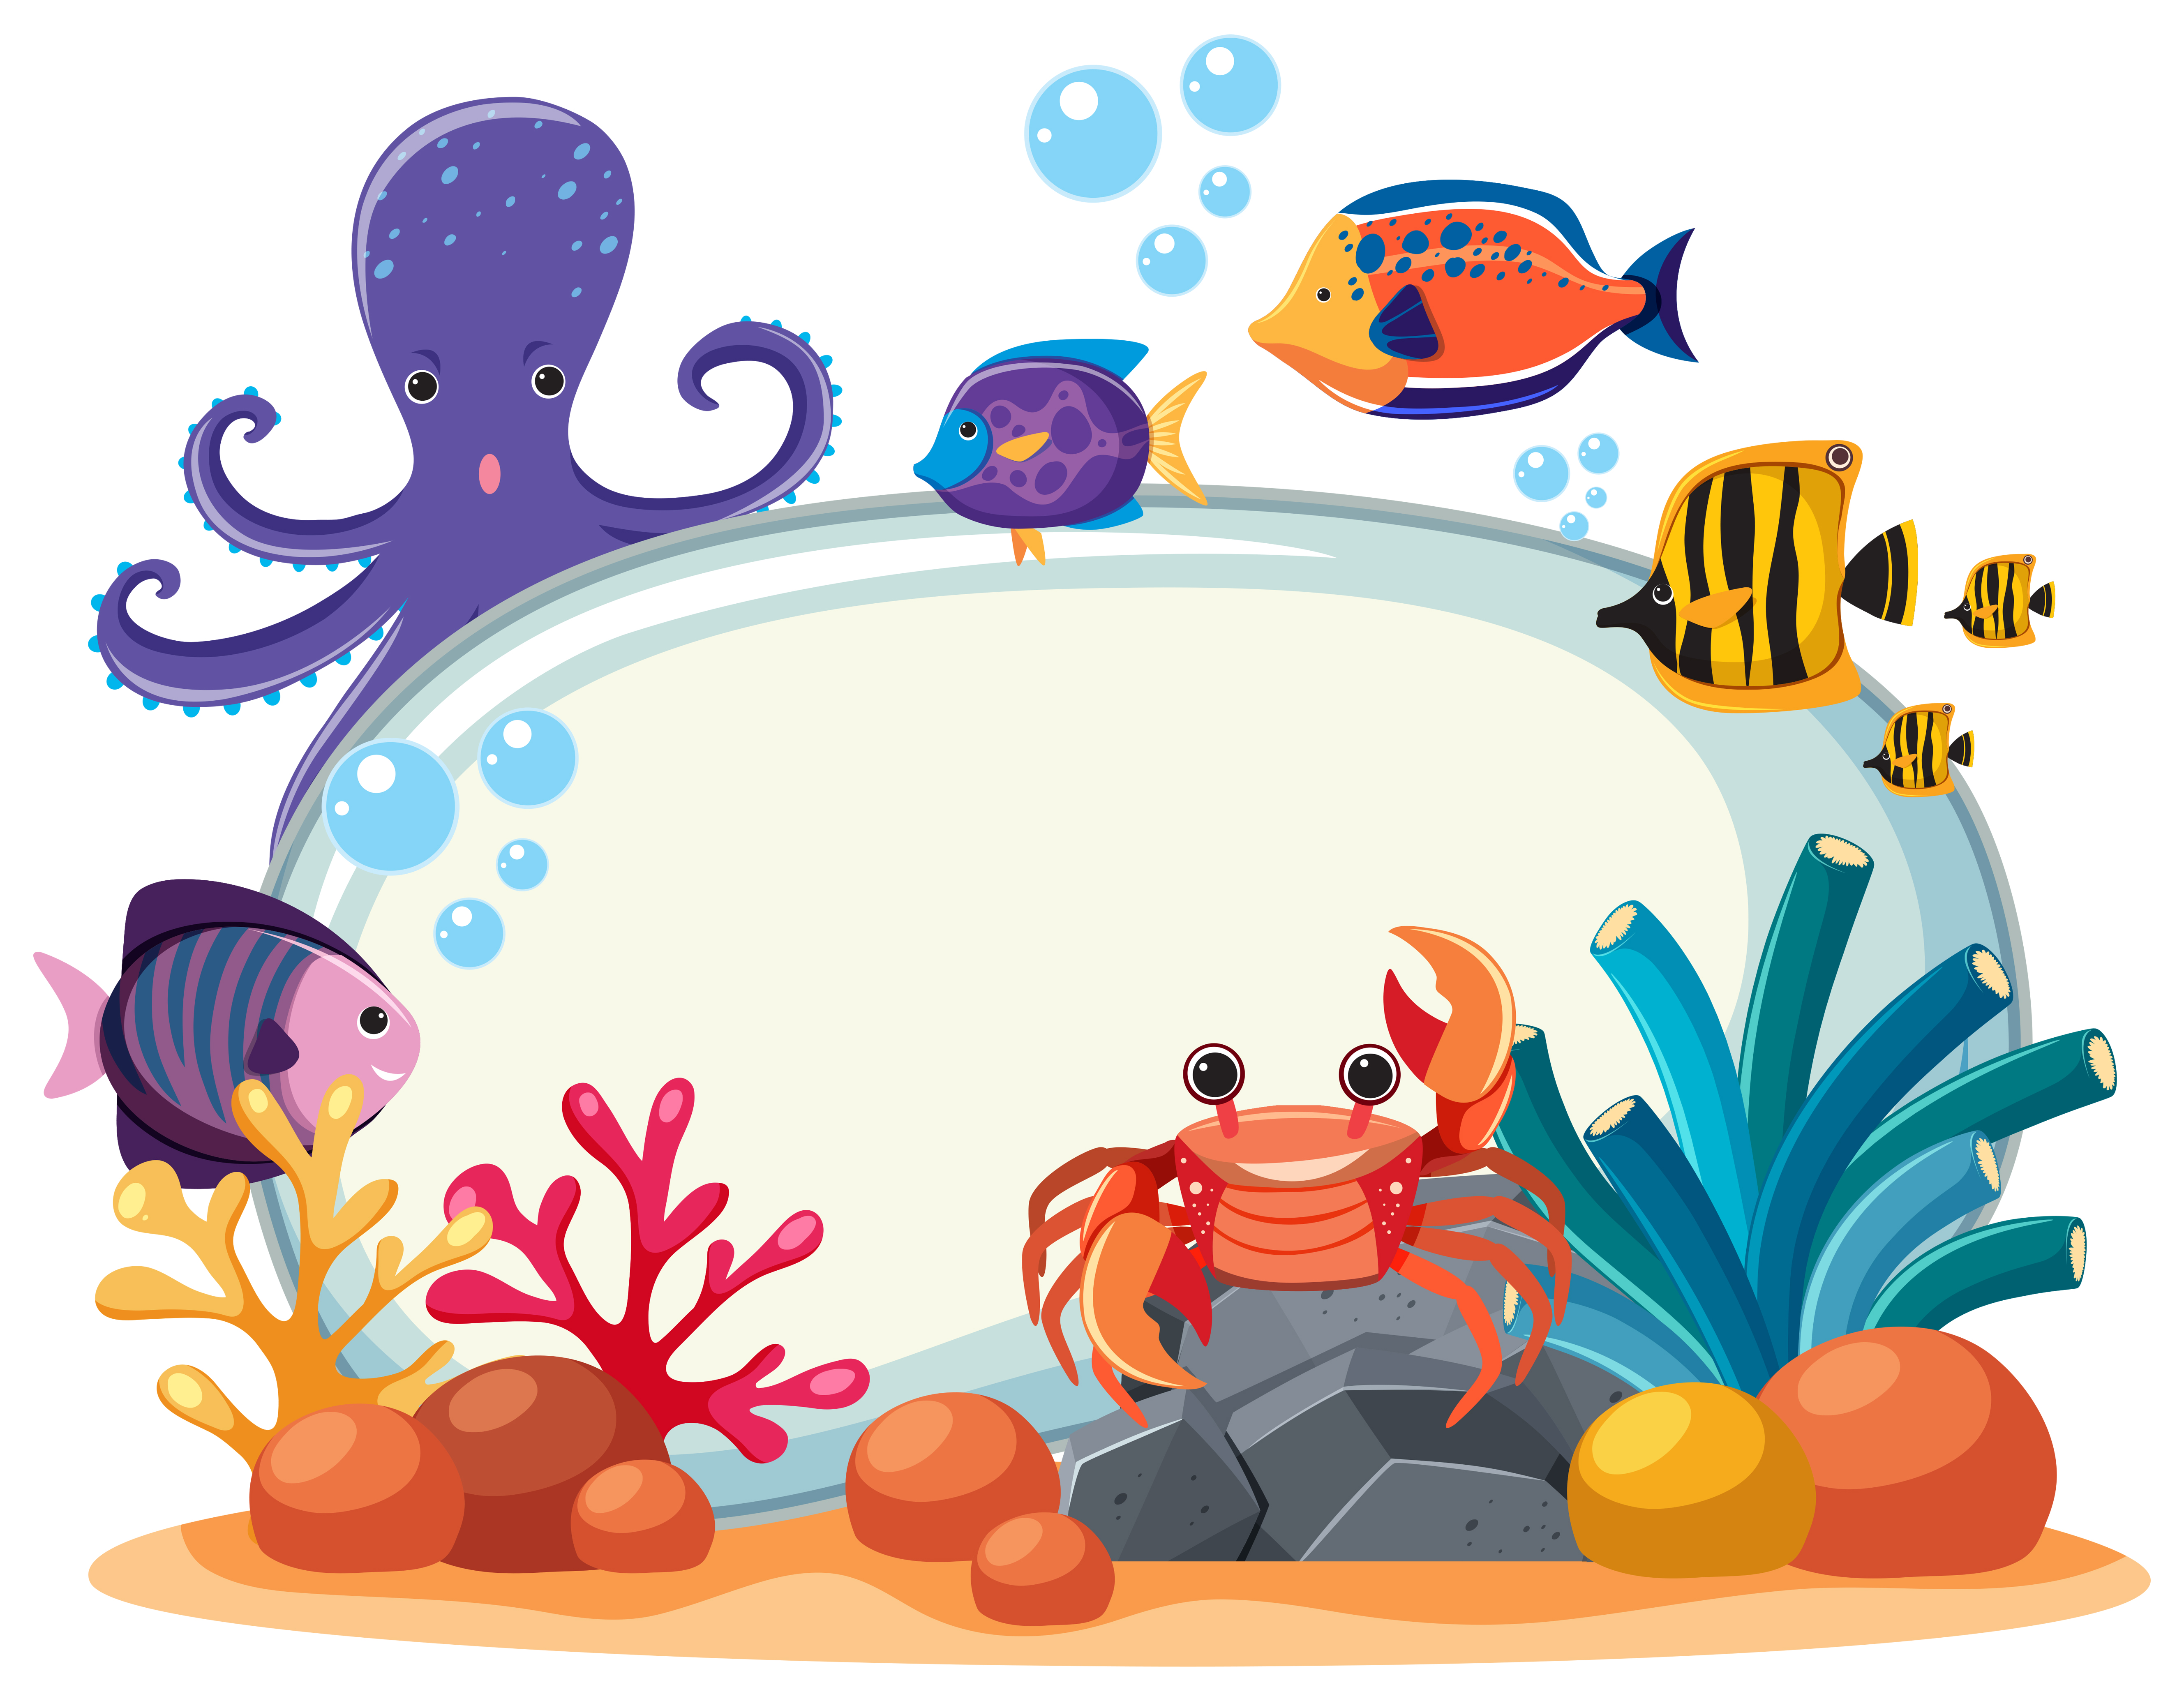 border-template-with-many-sea-animals-underwater-370403-vector-art-at